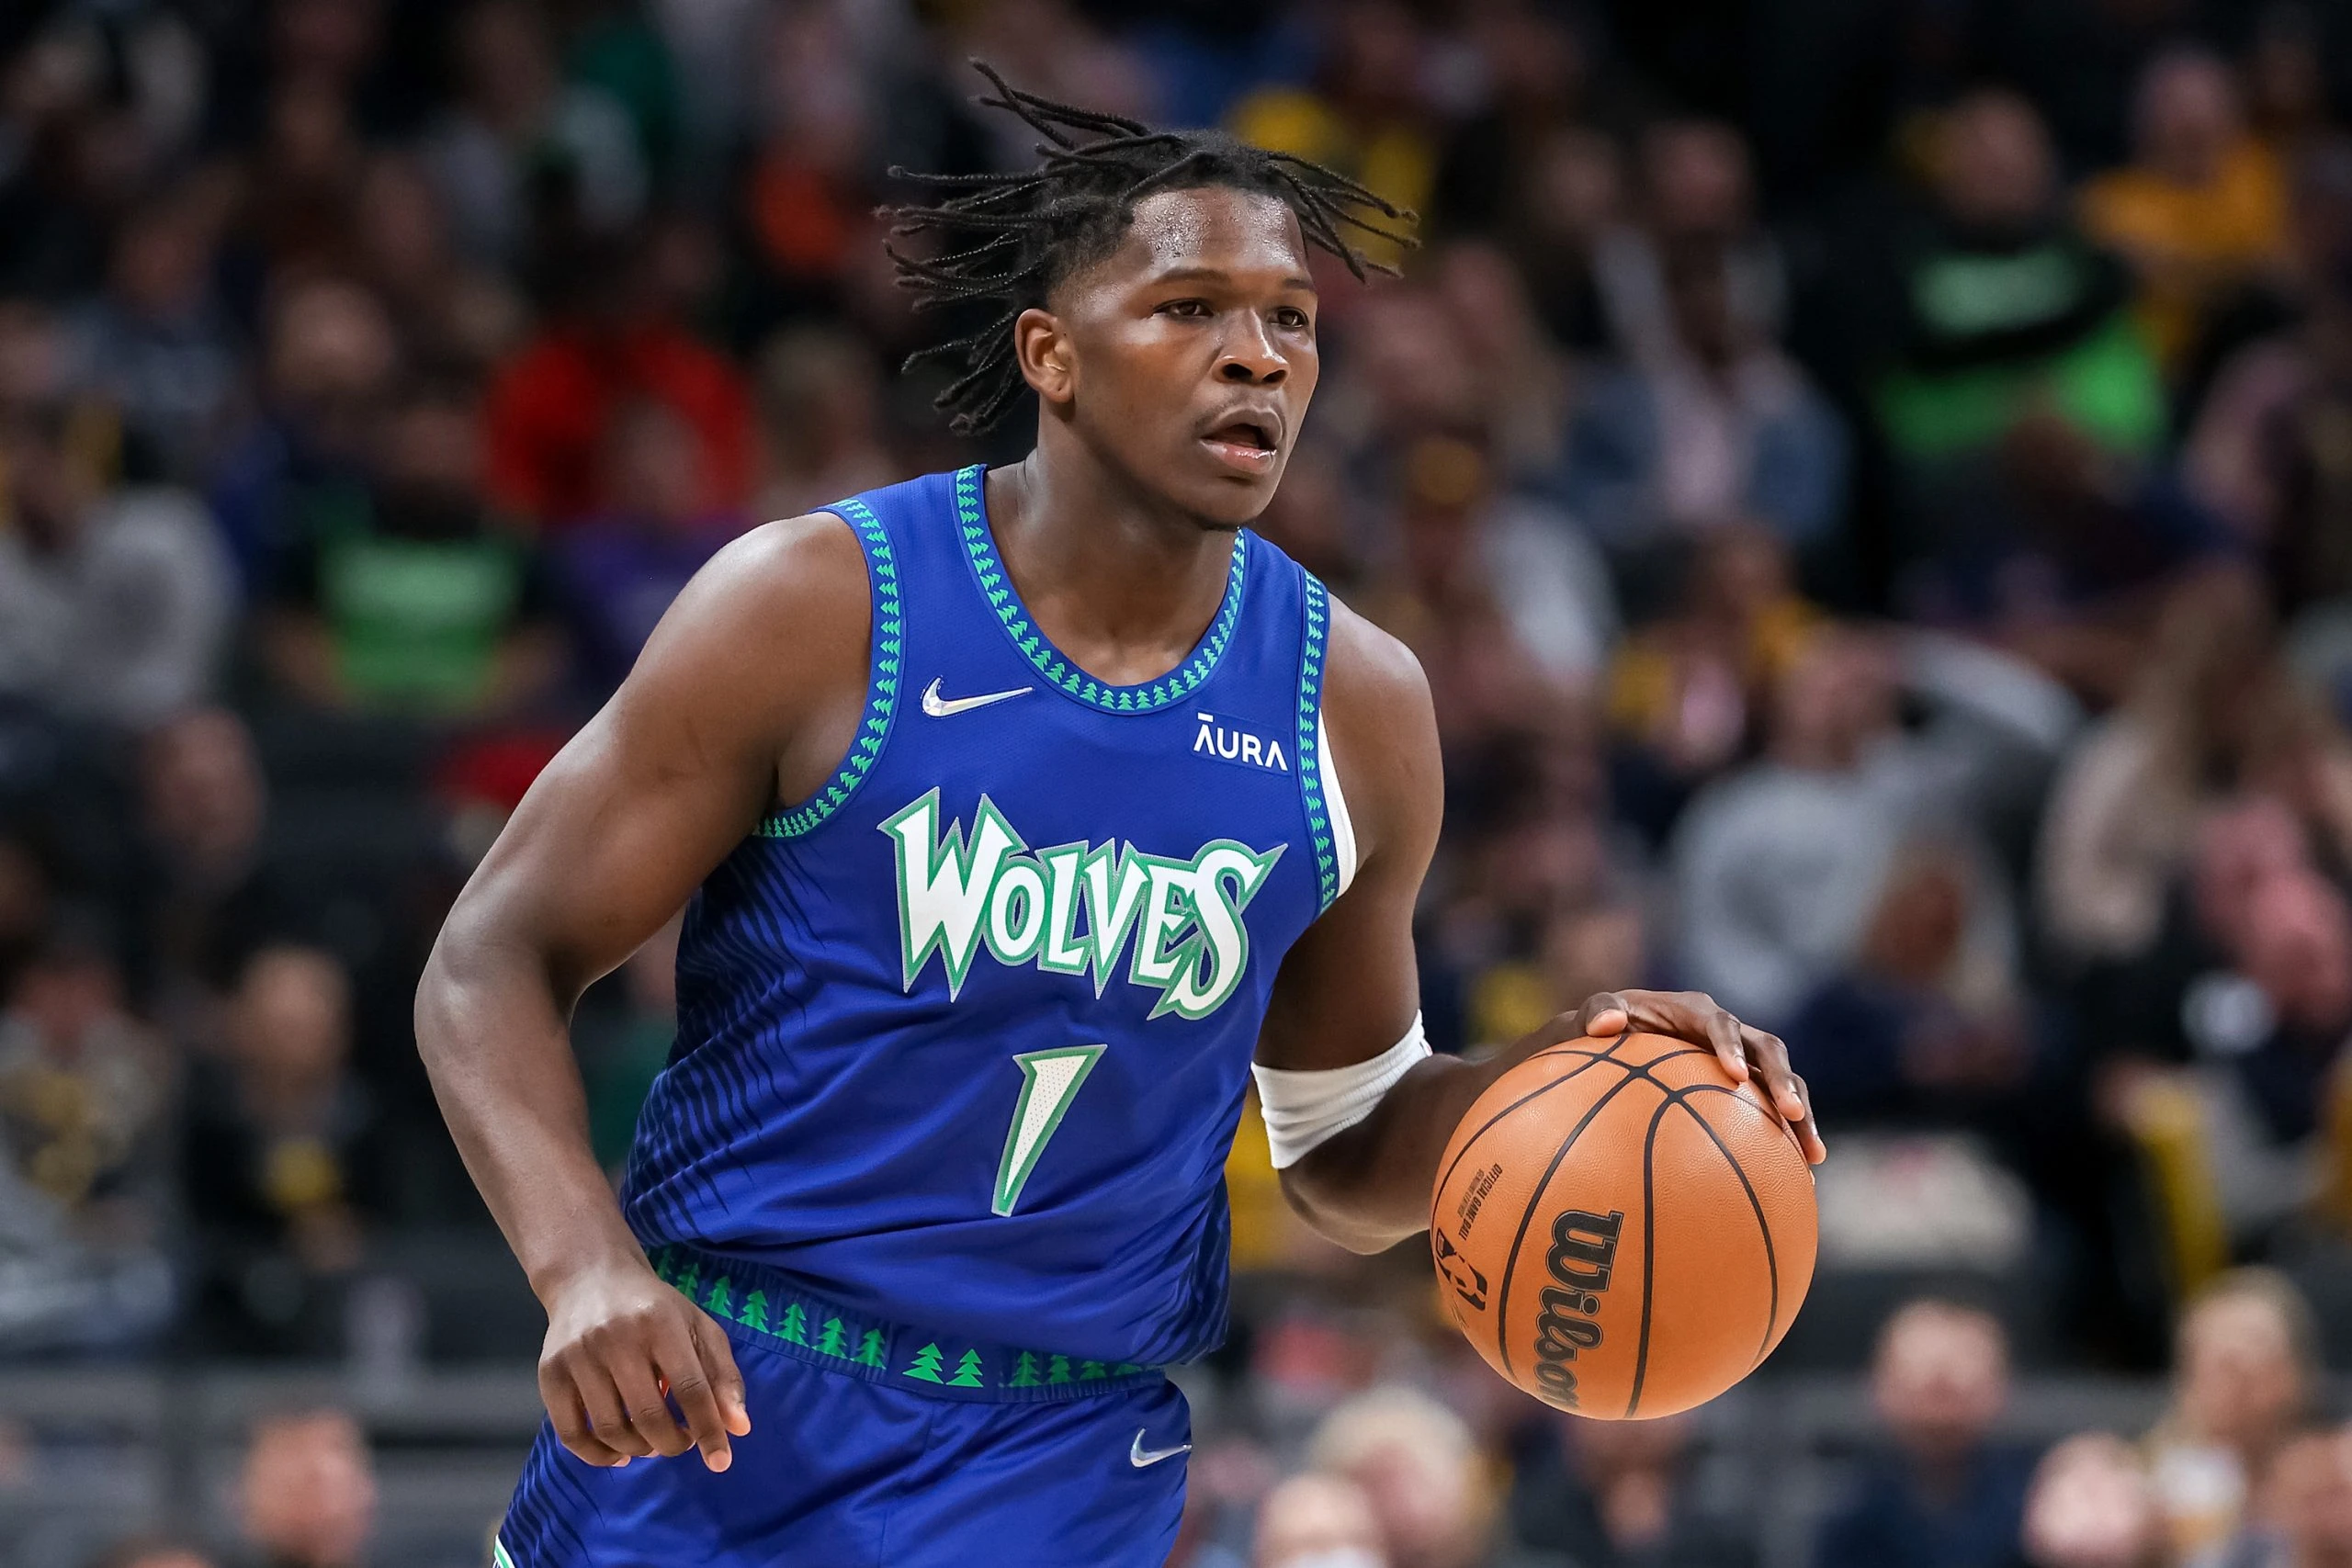 Anthony Edwards #1 of the Minnesota Timberwolves dribbles the ball in the second quarter against the Indiana Pacers at Gainbridge Fieldhouse on February 13, 2022 in Indianapolis, Indiana.